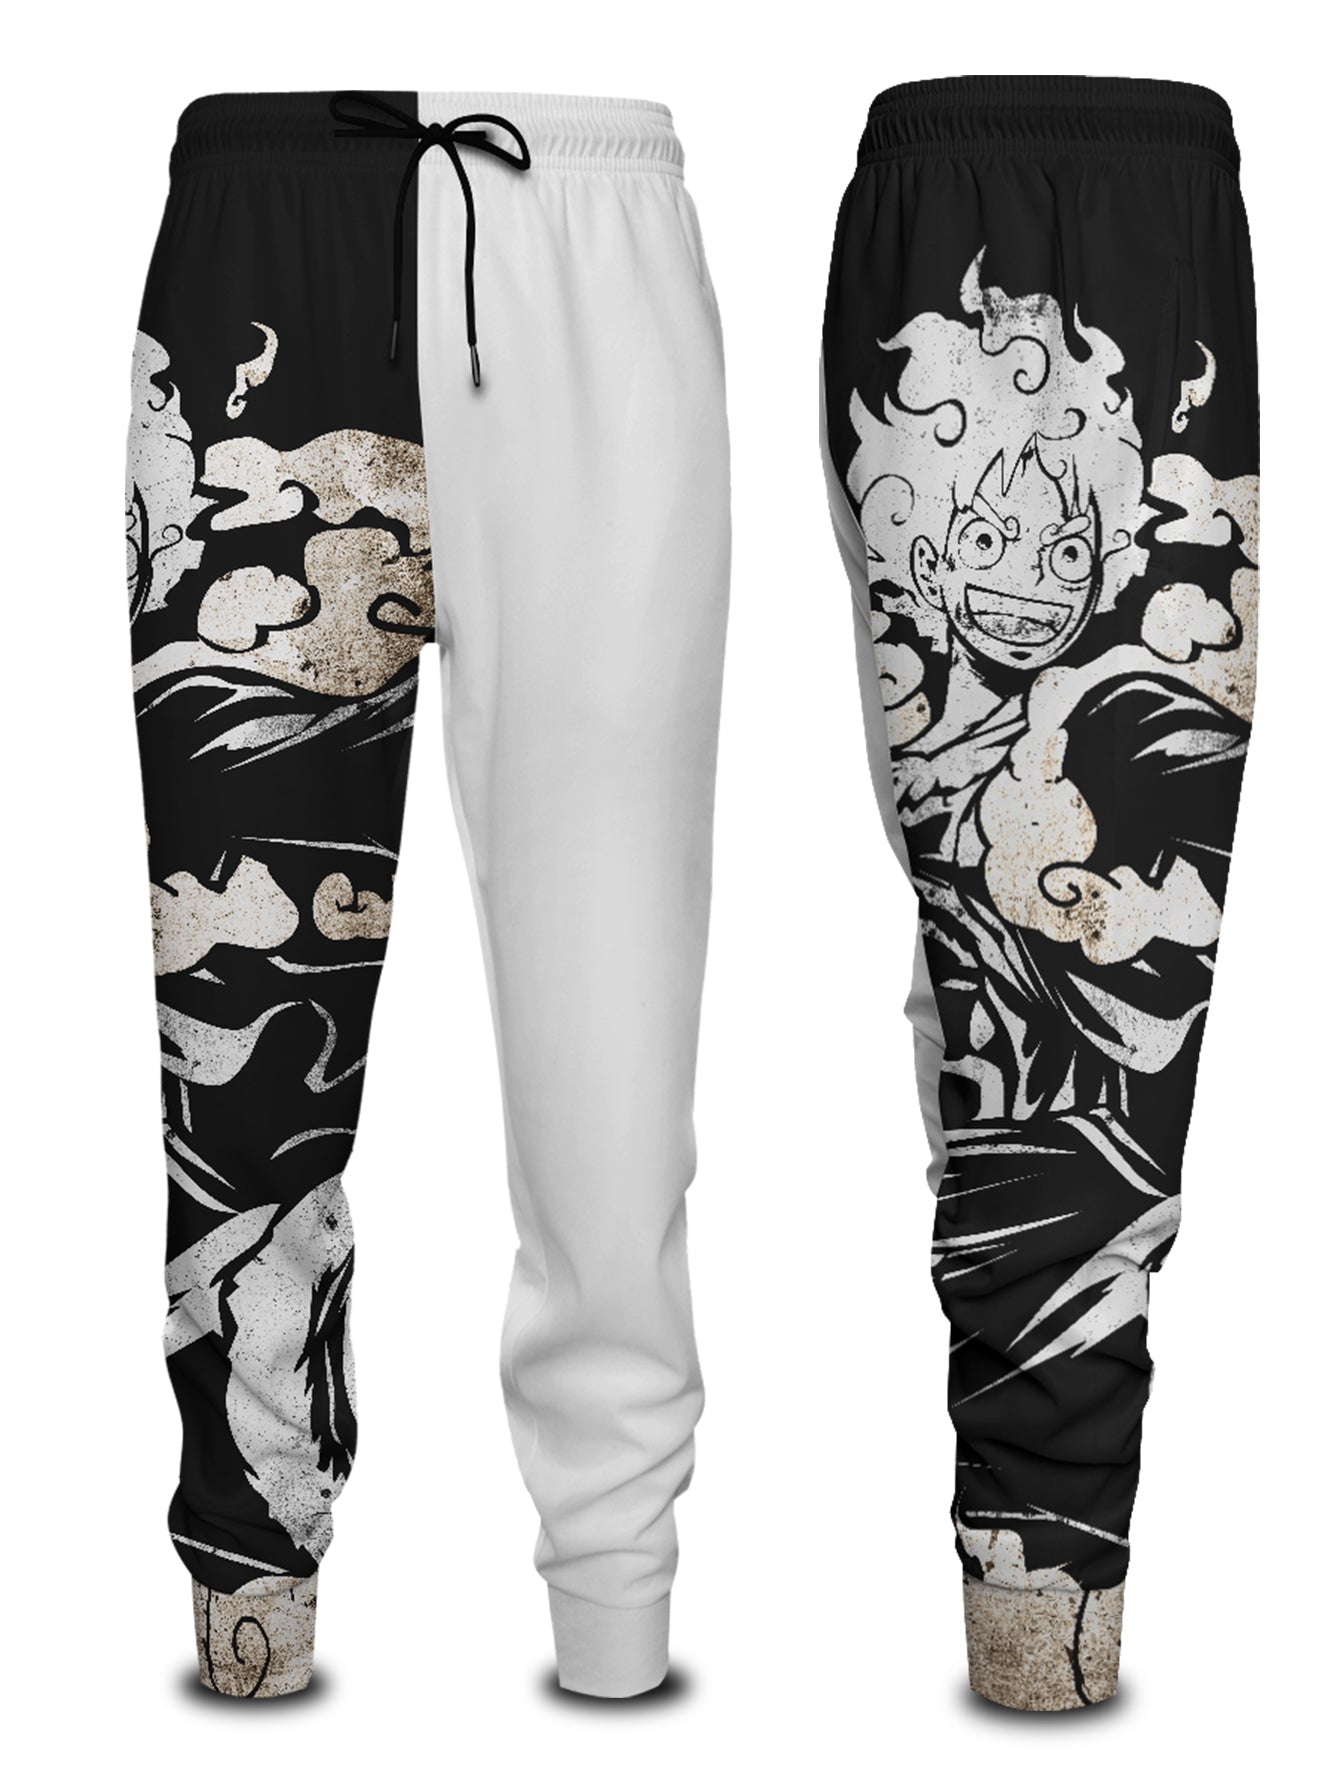 Cool Leggings and Joggers